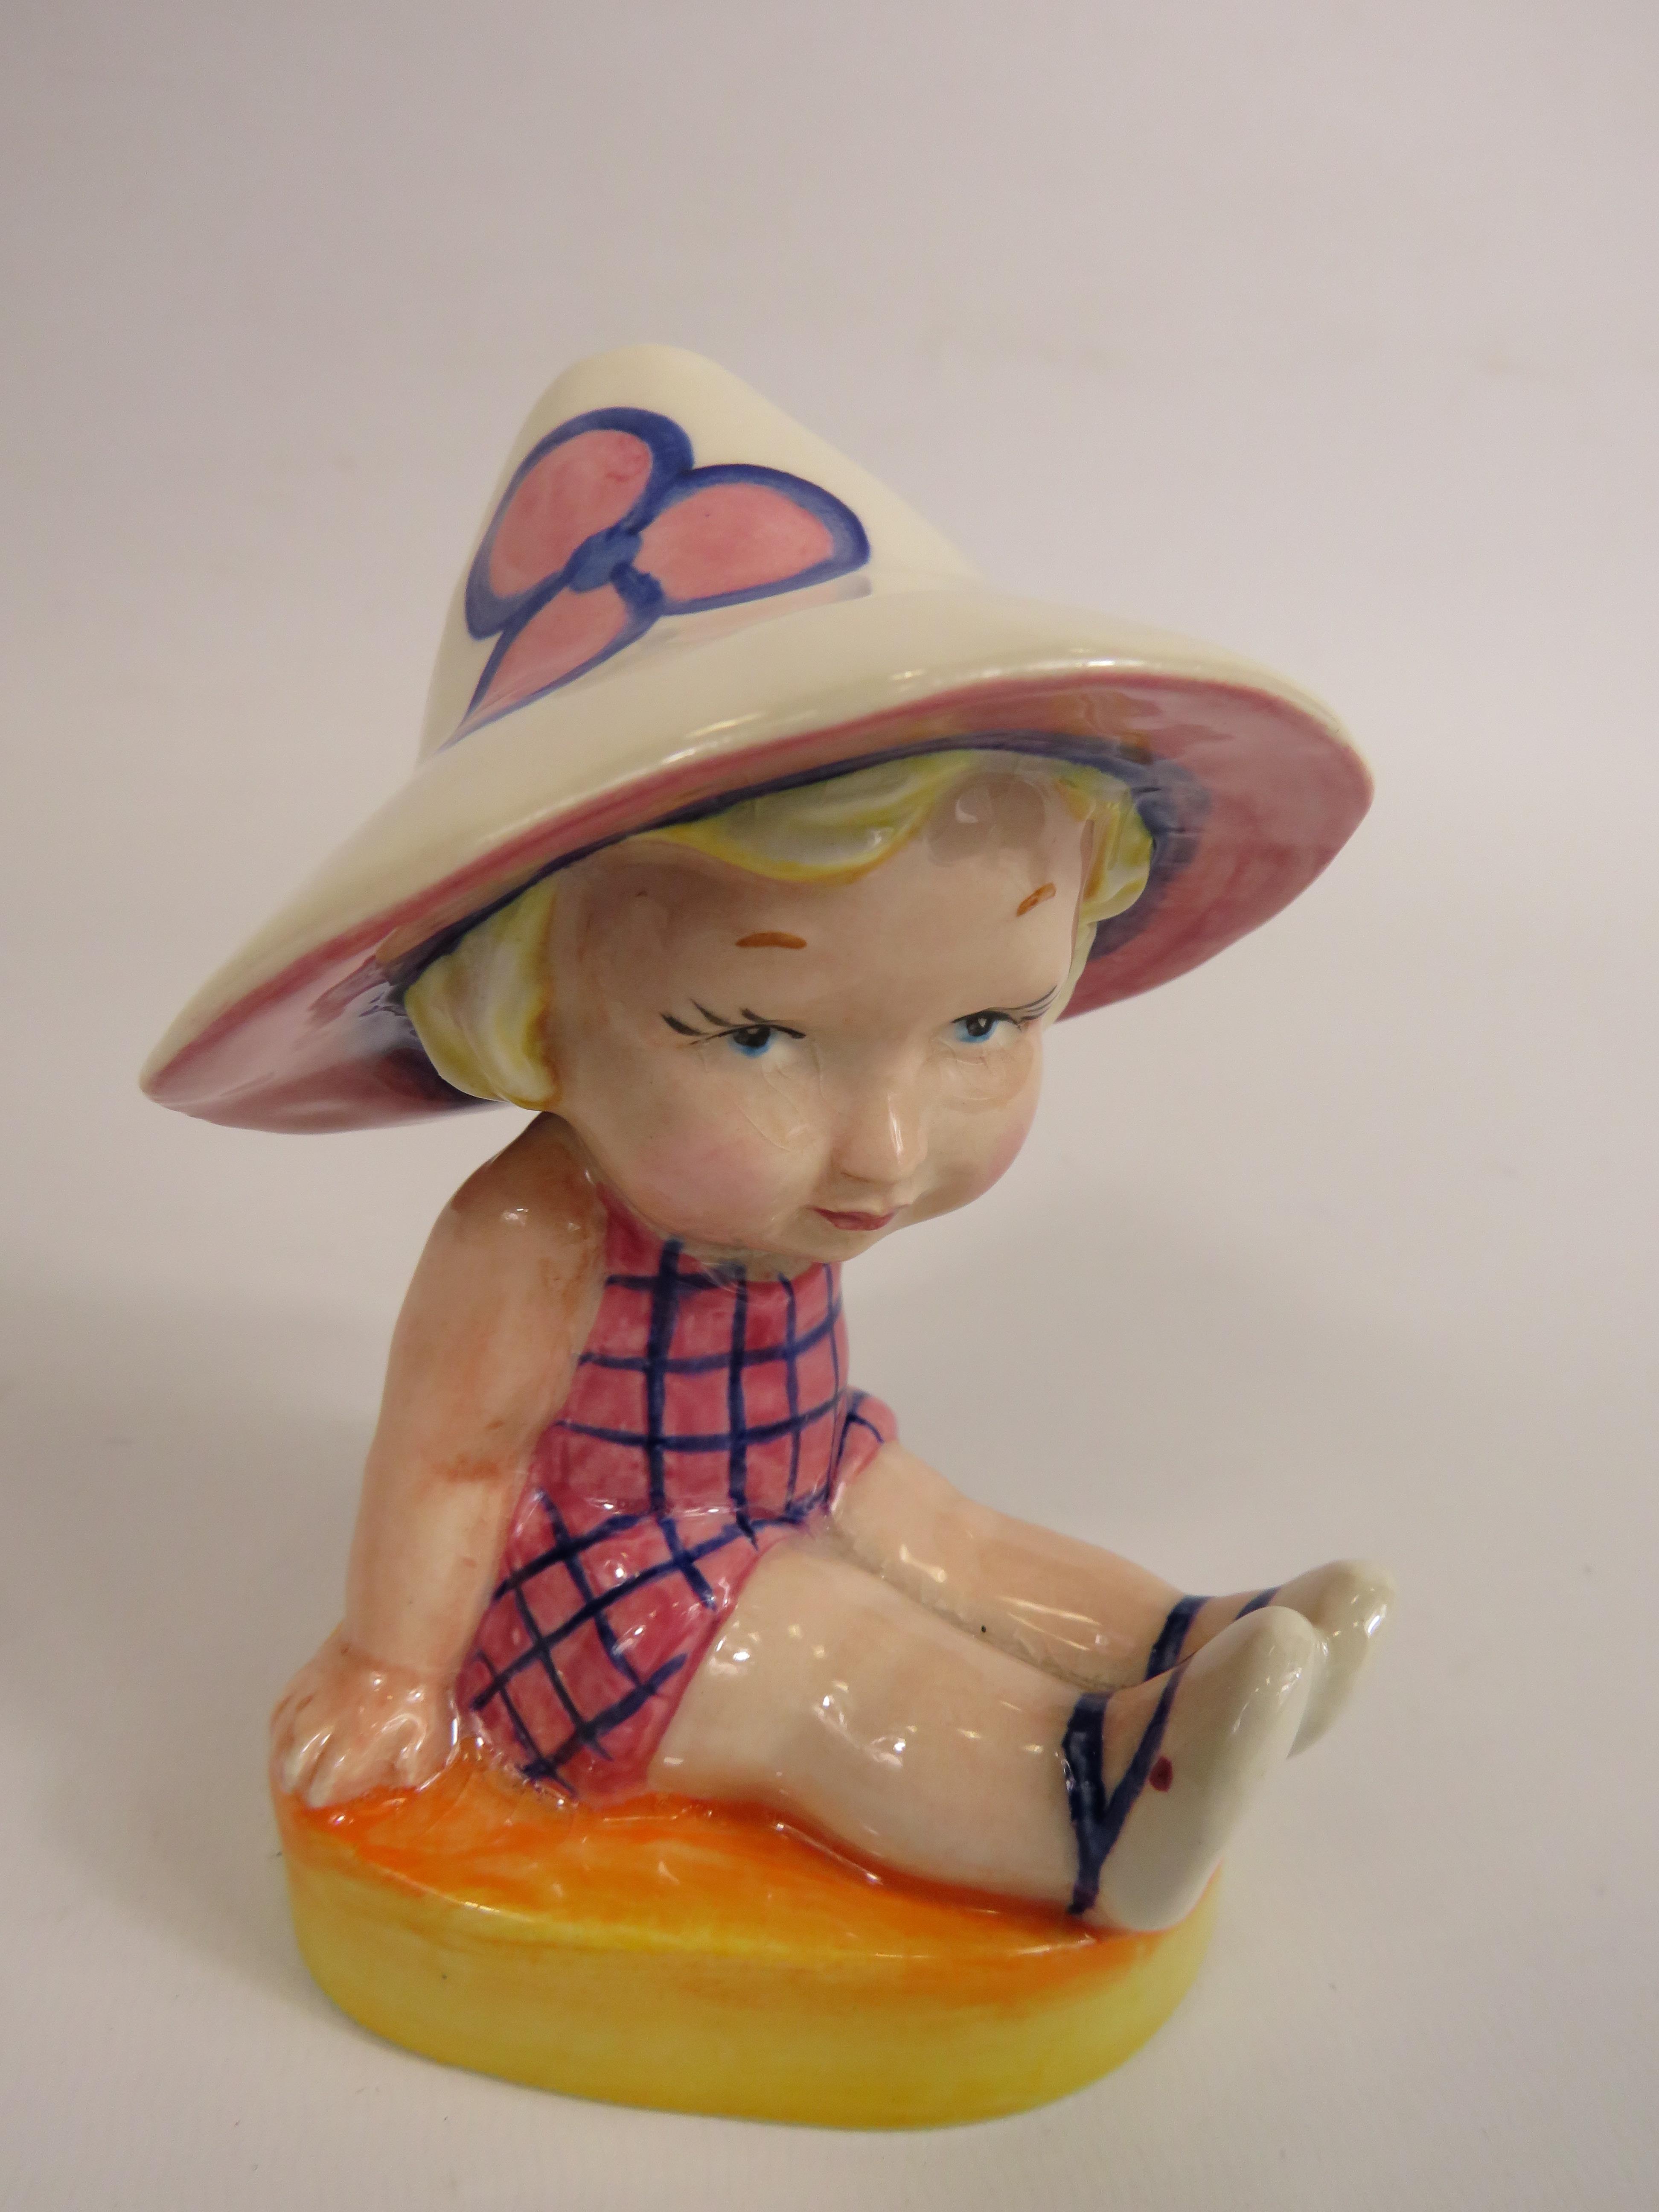 Lorna Bailey Art deco style figurine No 1 of 1, little girl seated wearing a sun hat. 13cm tall. - Image 4 of 7